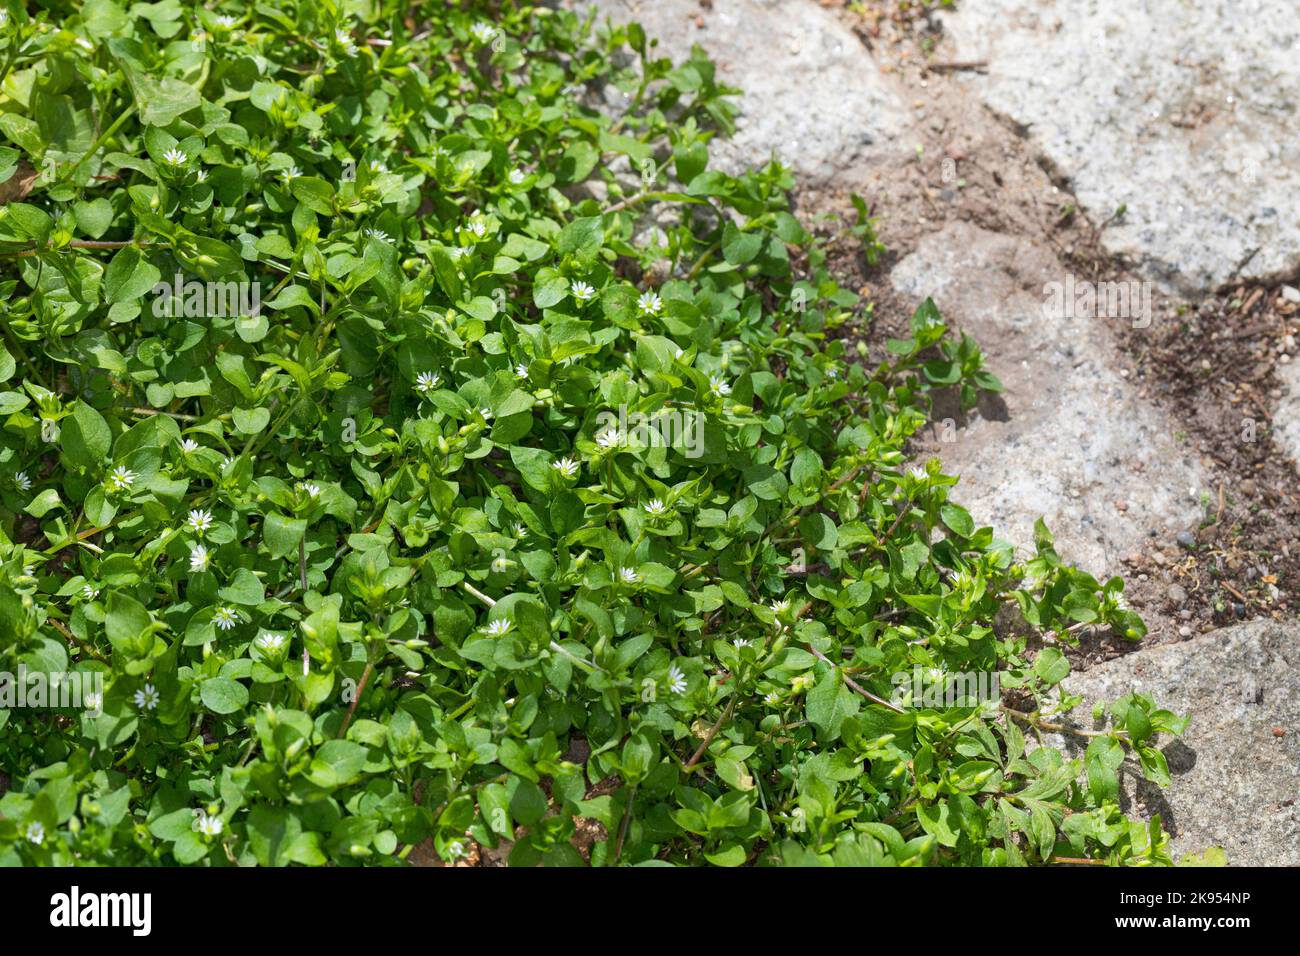 common chickweed (Stellaria media), grows in paving gaps, Germany Stock Photo